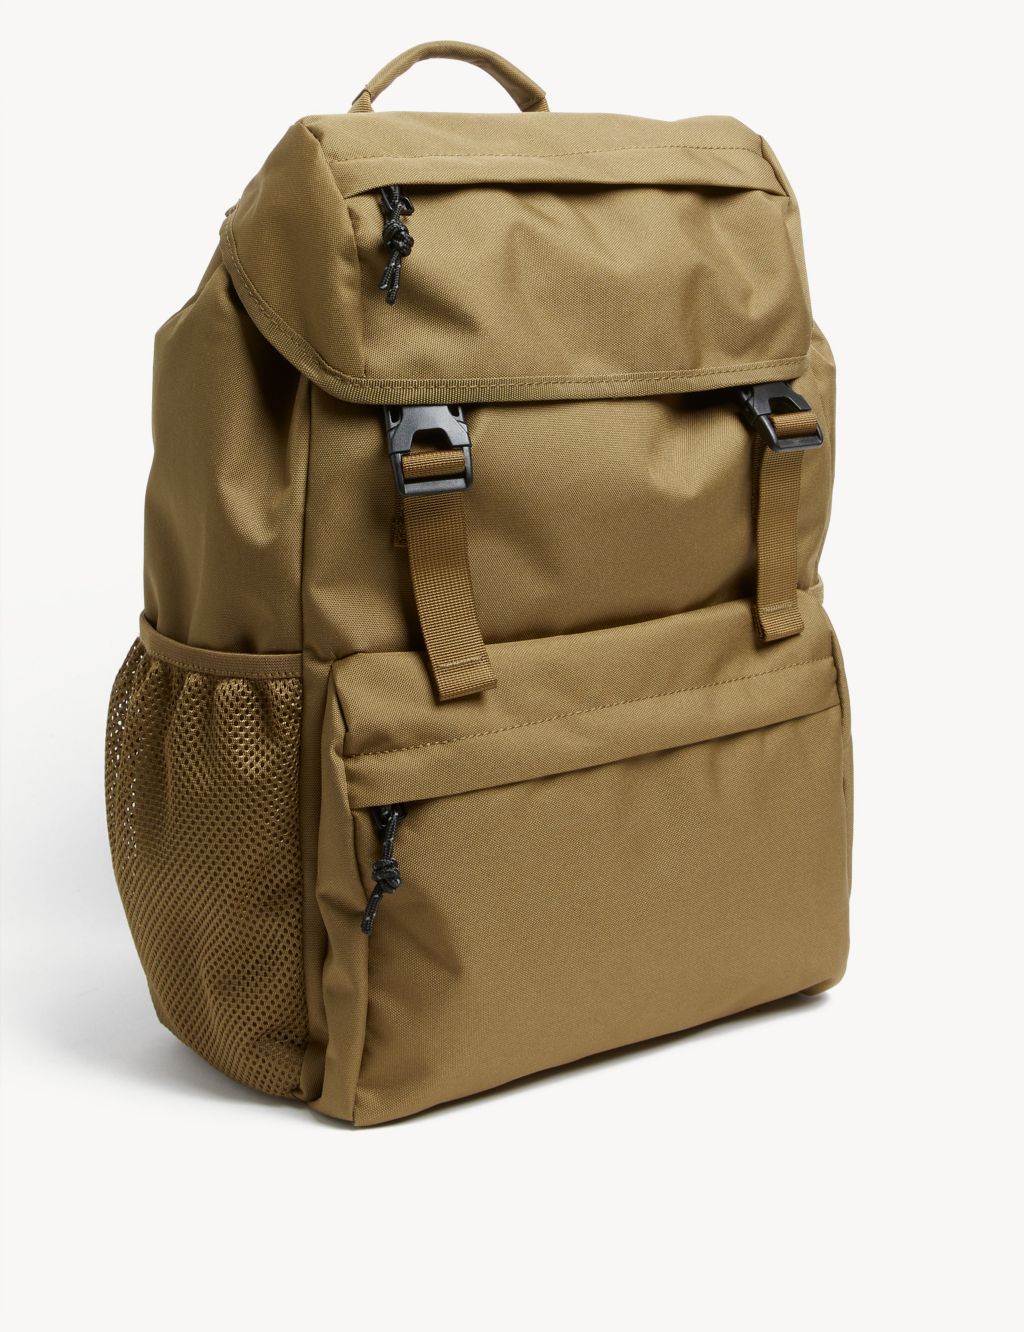 Pro-Tect™ Scuff Resistant Backpack image 1